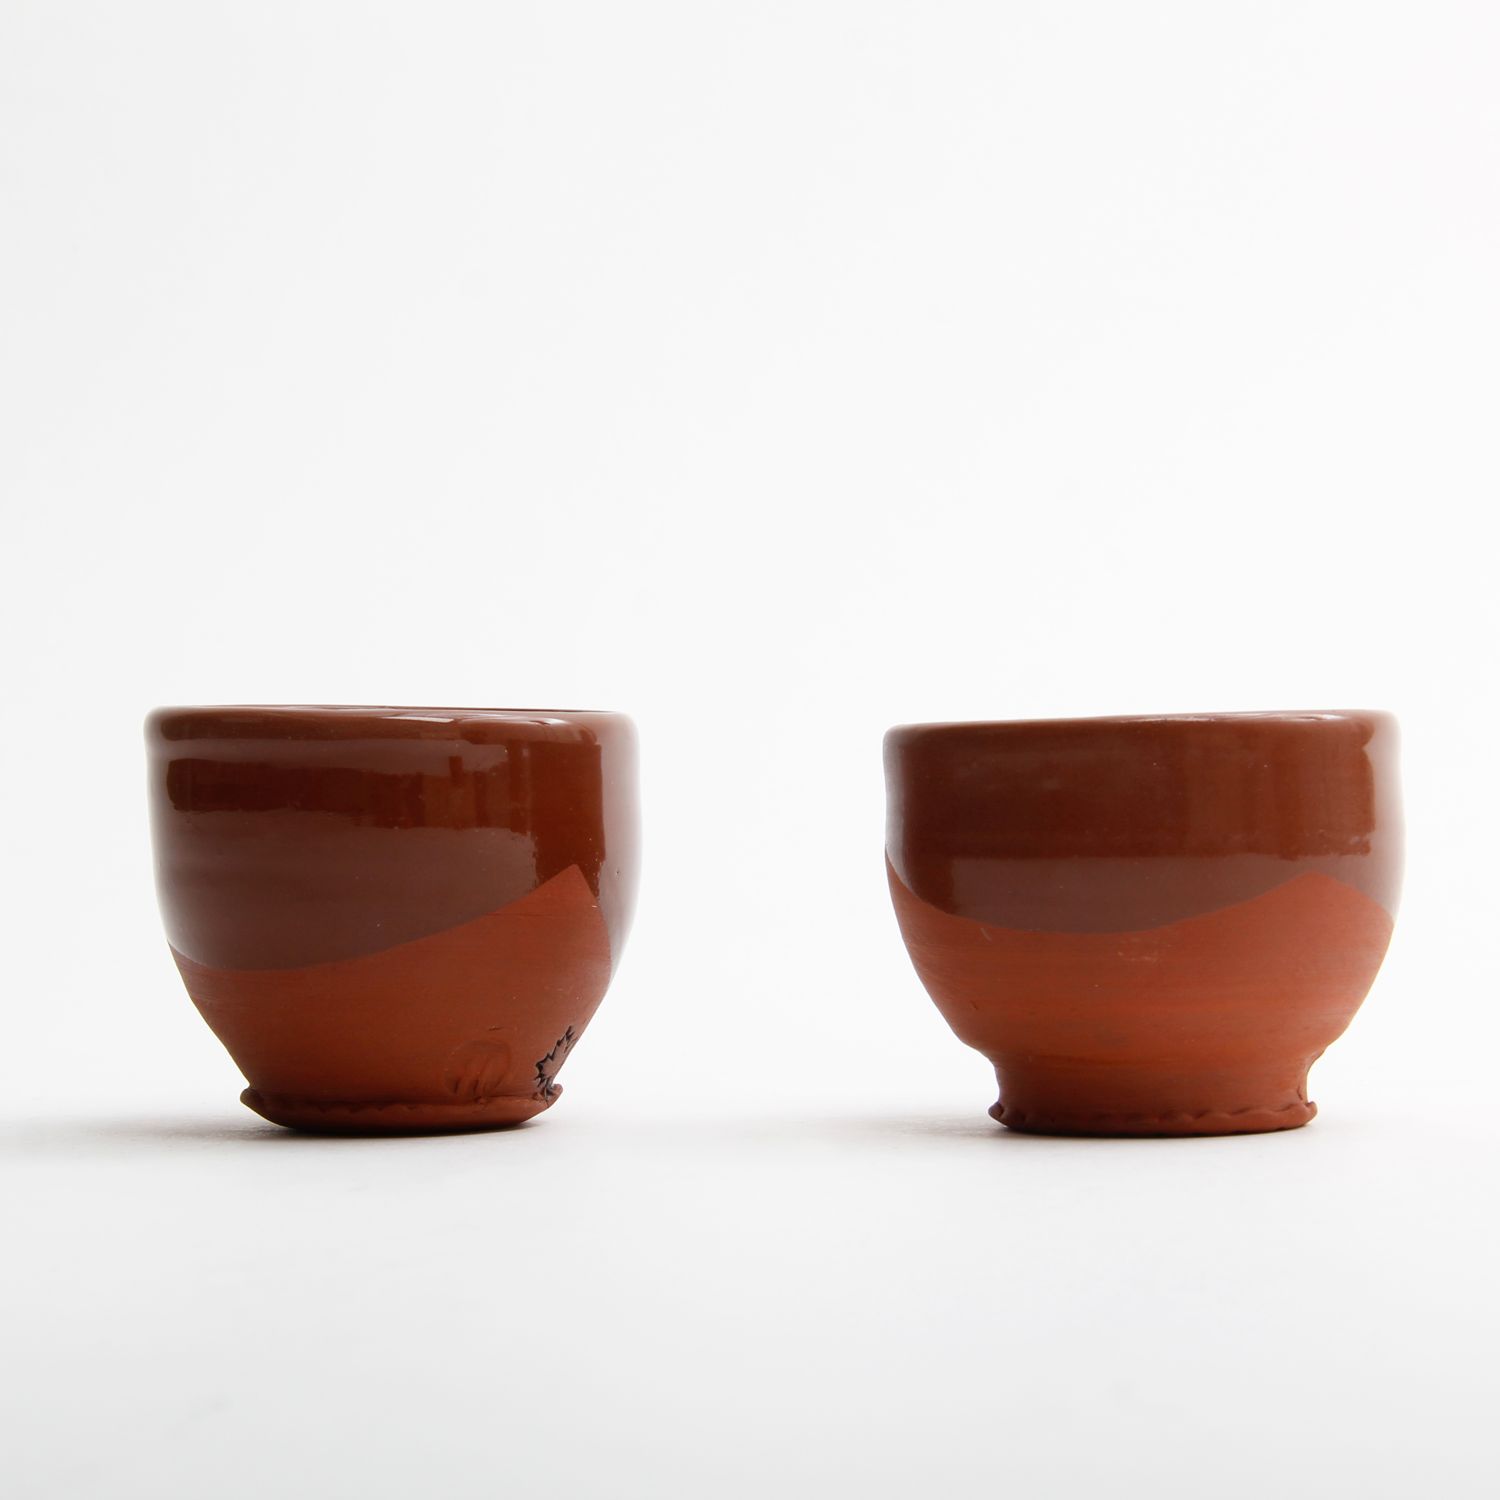 Mary McKenzie: Small Dip Bowl Brown Product Image 2 of 2